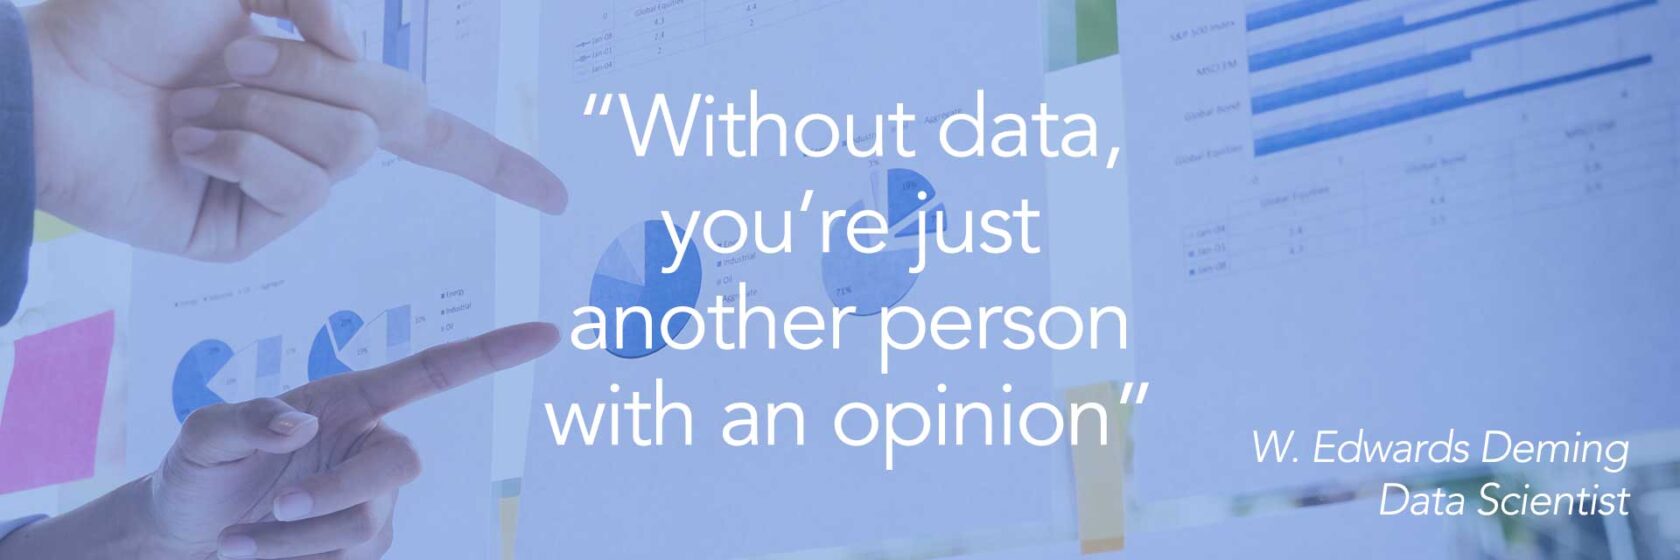 without-data-another-person-deming